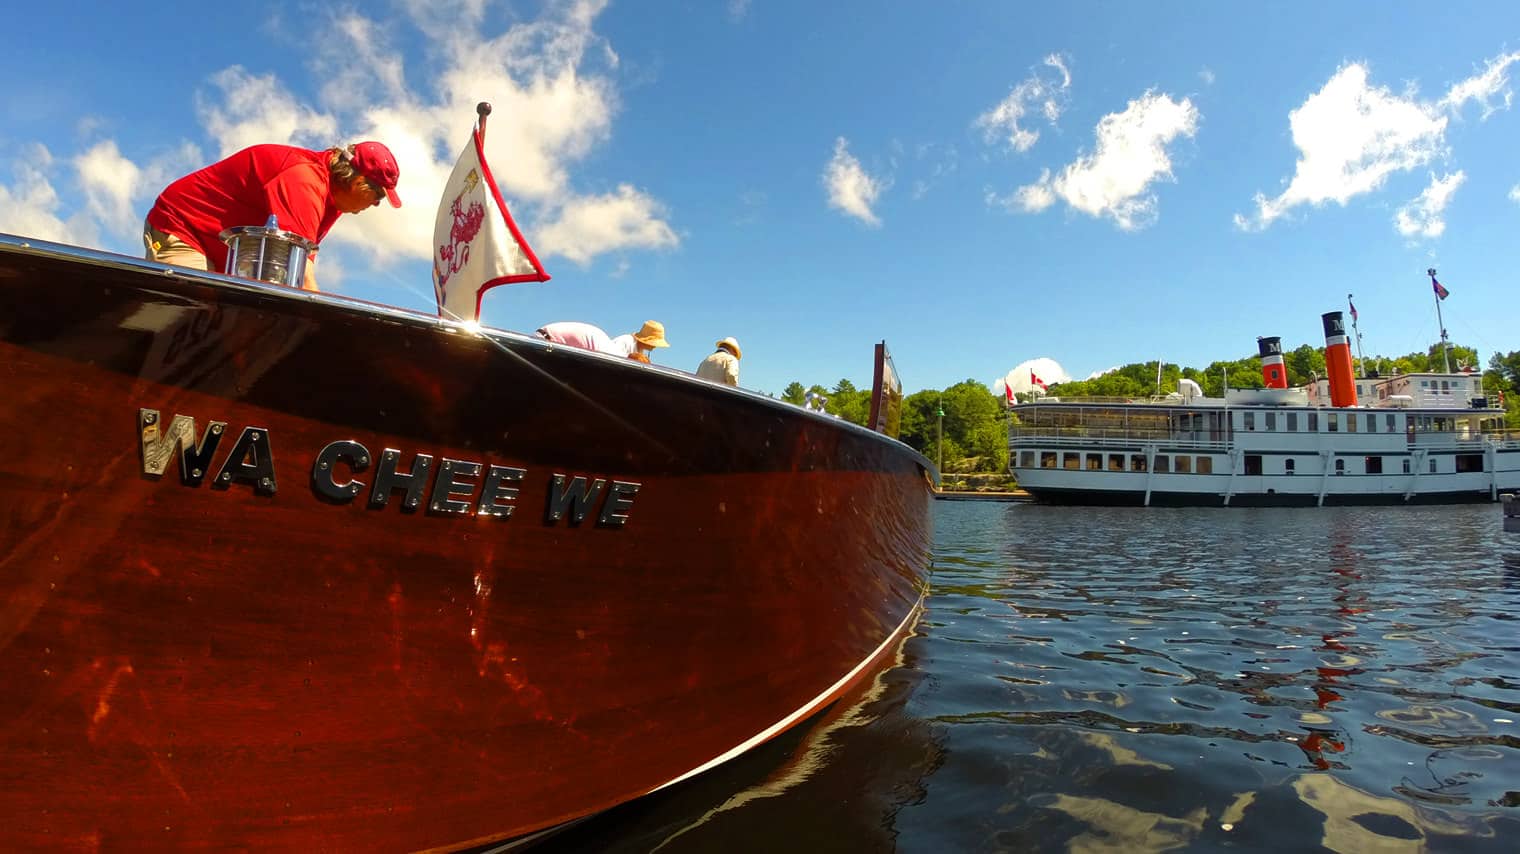 Muskoka Steamships - Best Places to Visit in Canada